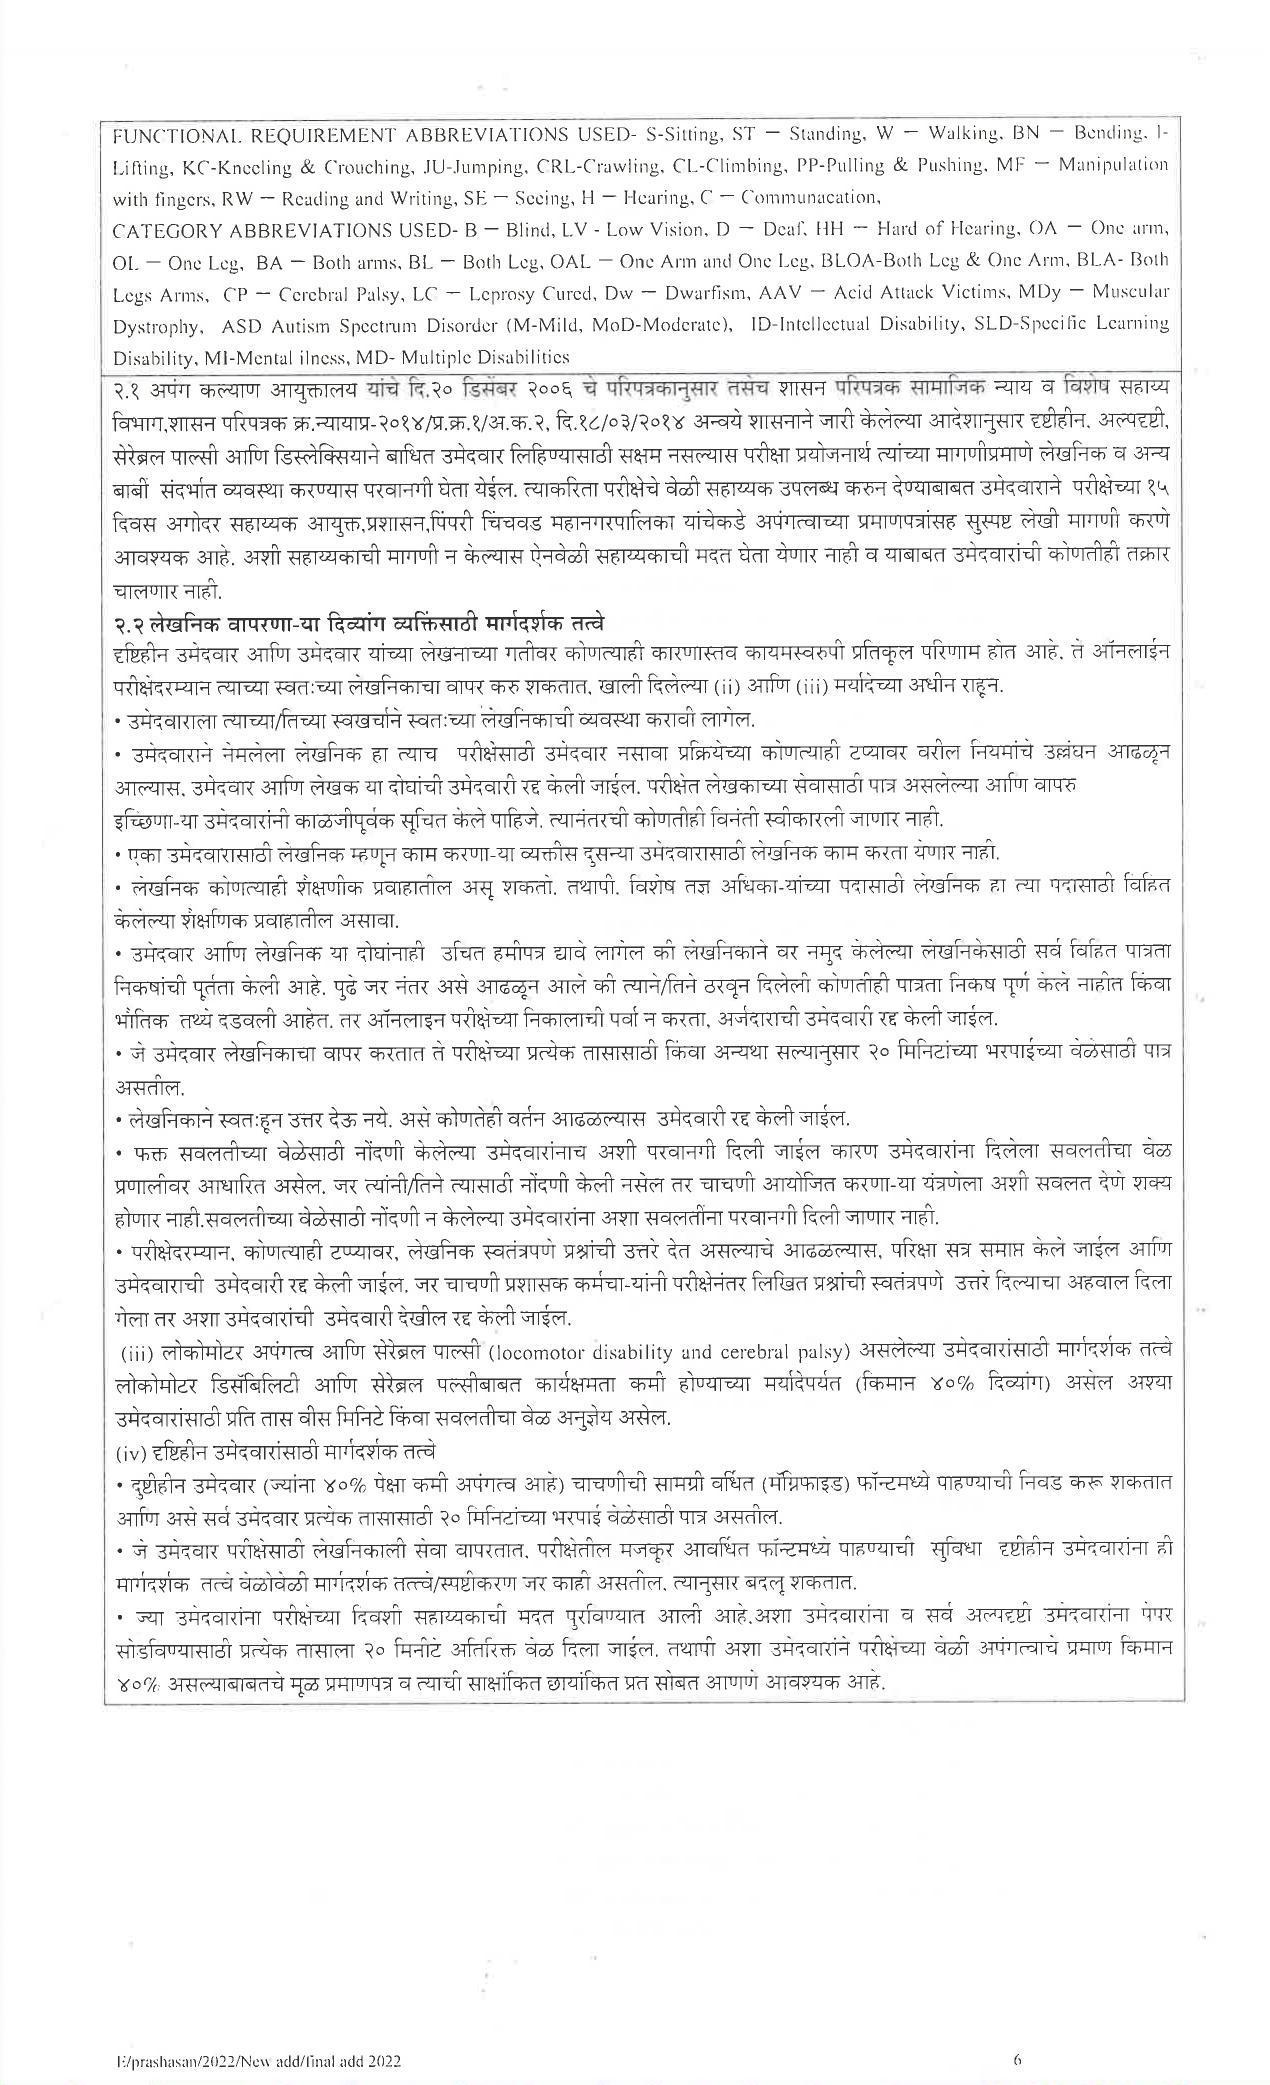 PCMC Invites Application for 386 Group-C, Group-B Recruitment 2022 - Page 7